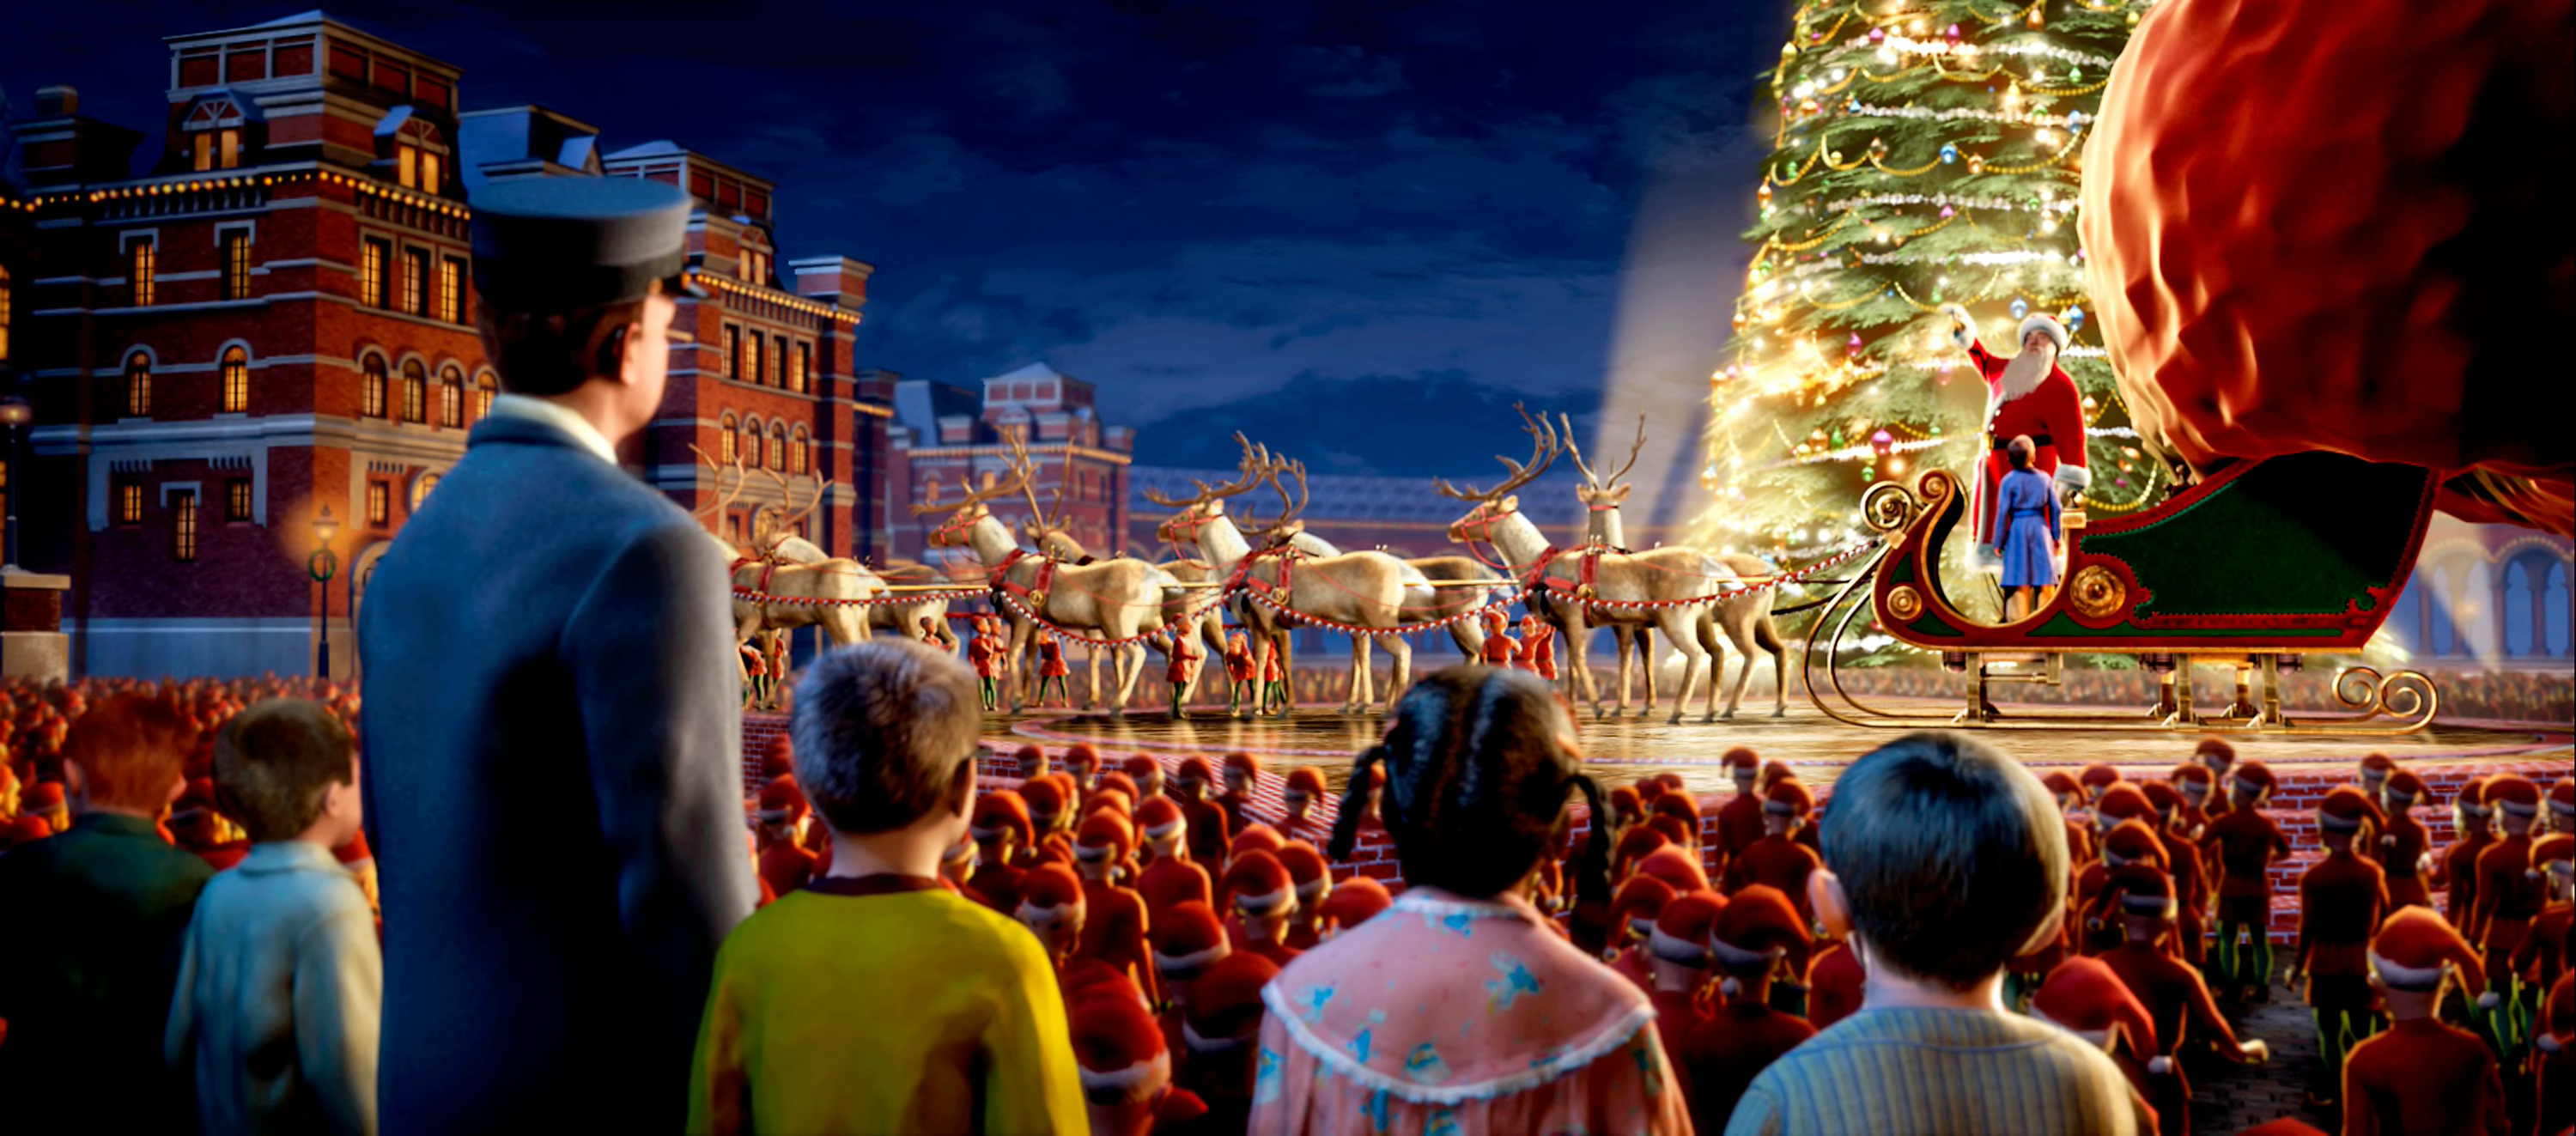 25 Best Christmas Movies Countdown 4 The Polar Express